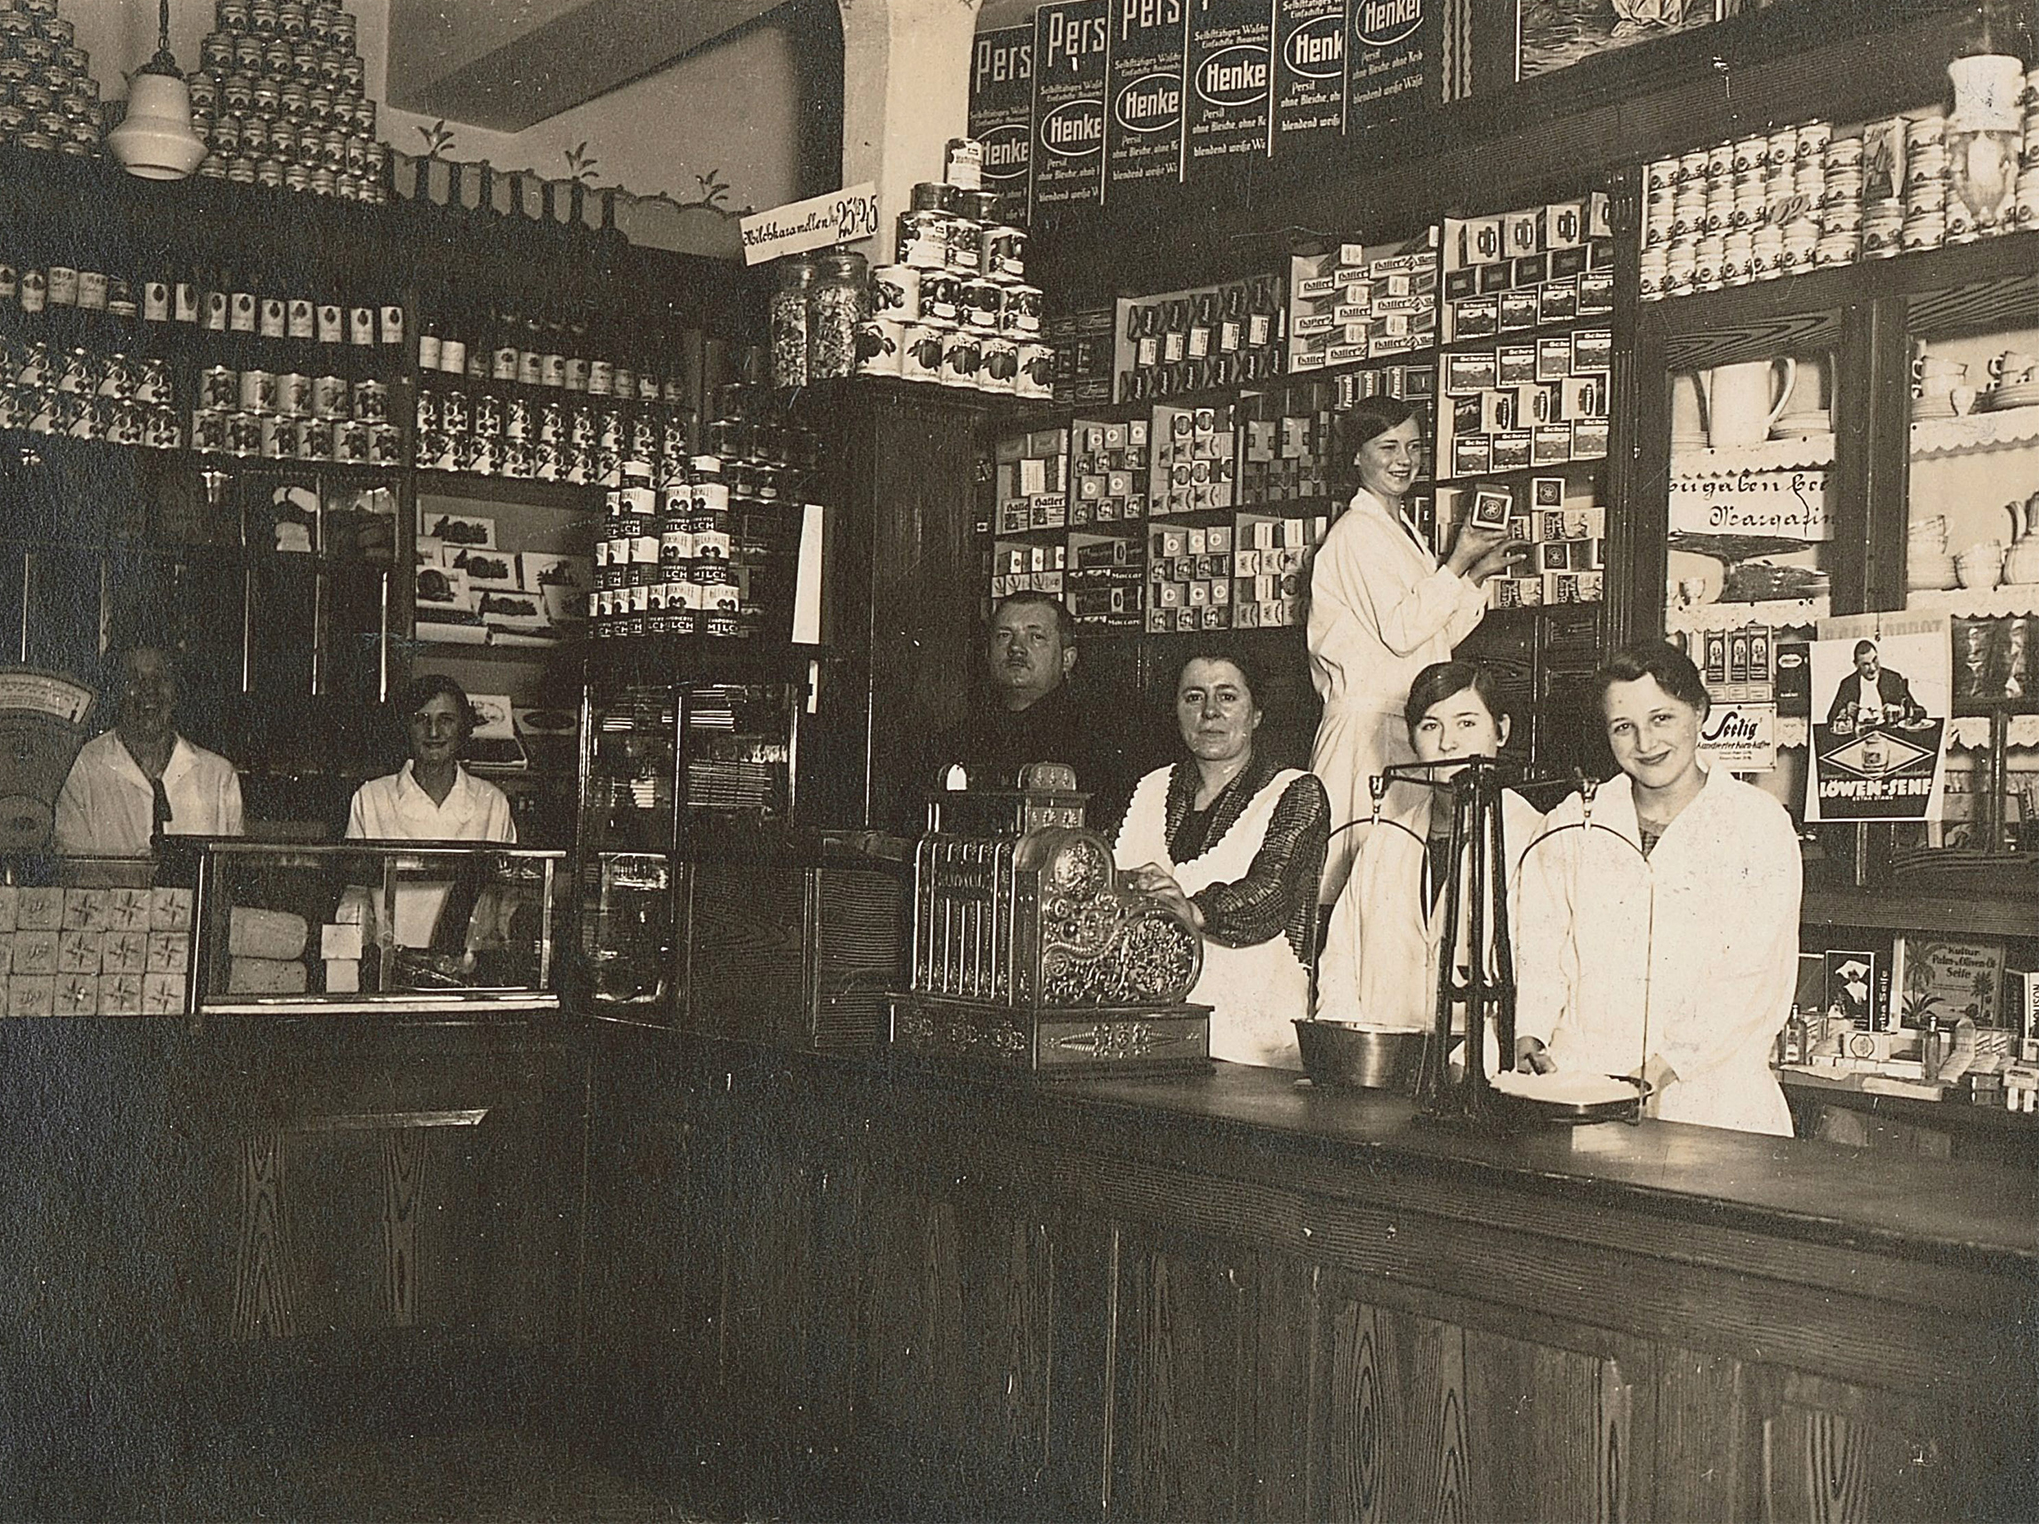 A 1930 image of the Karl Albrecht Spiritousen and Lebensmittel shop, Essen. The shop was opened by Karl and Theo Albrecht’s mother; the brothers later founded Aldi